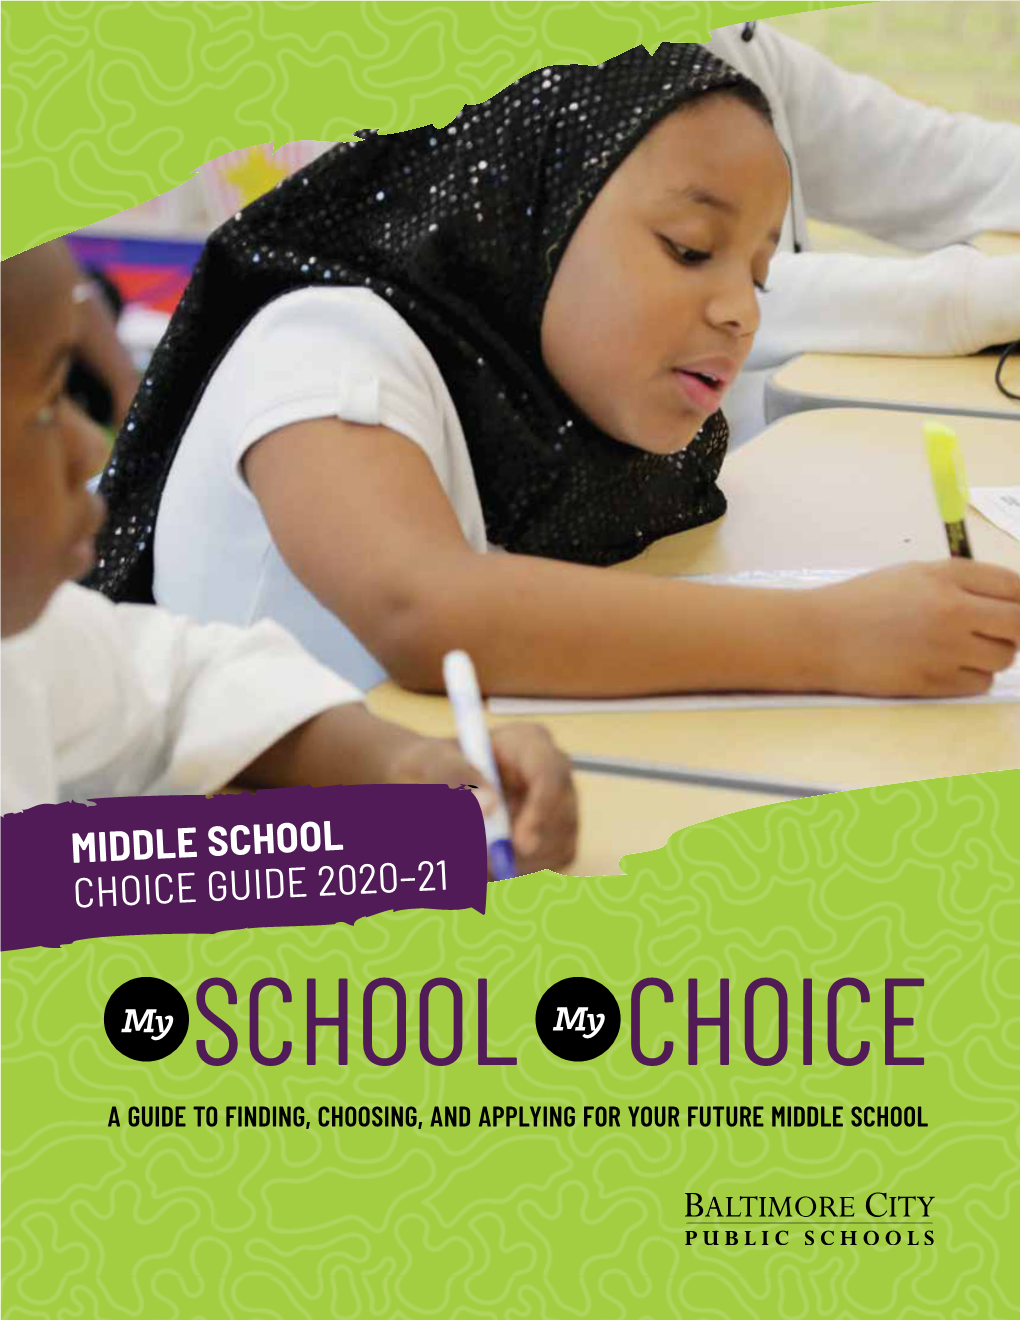 Baltimore City Schools Middle School Choice Guide for 2020-21